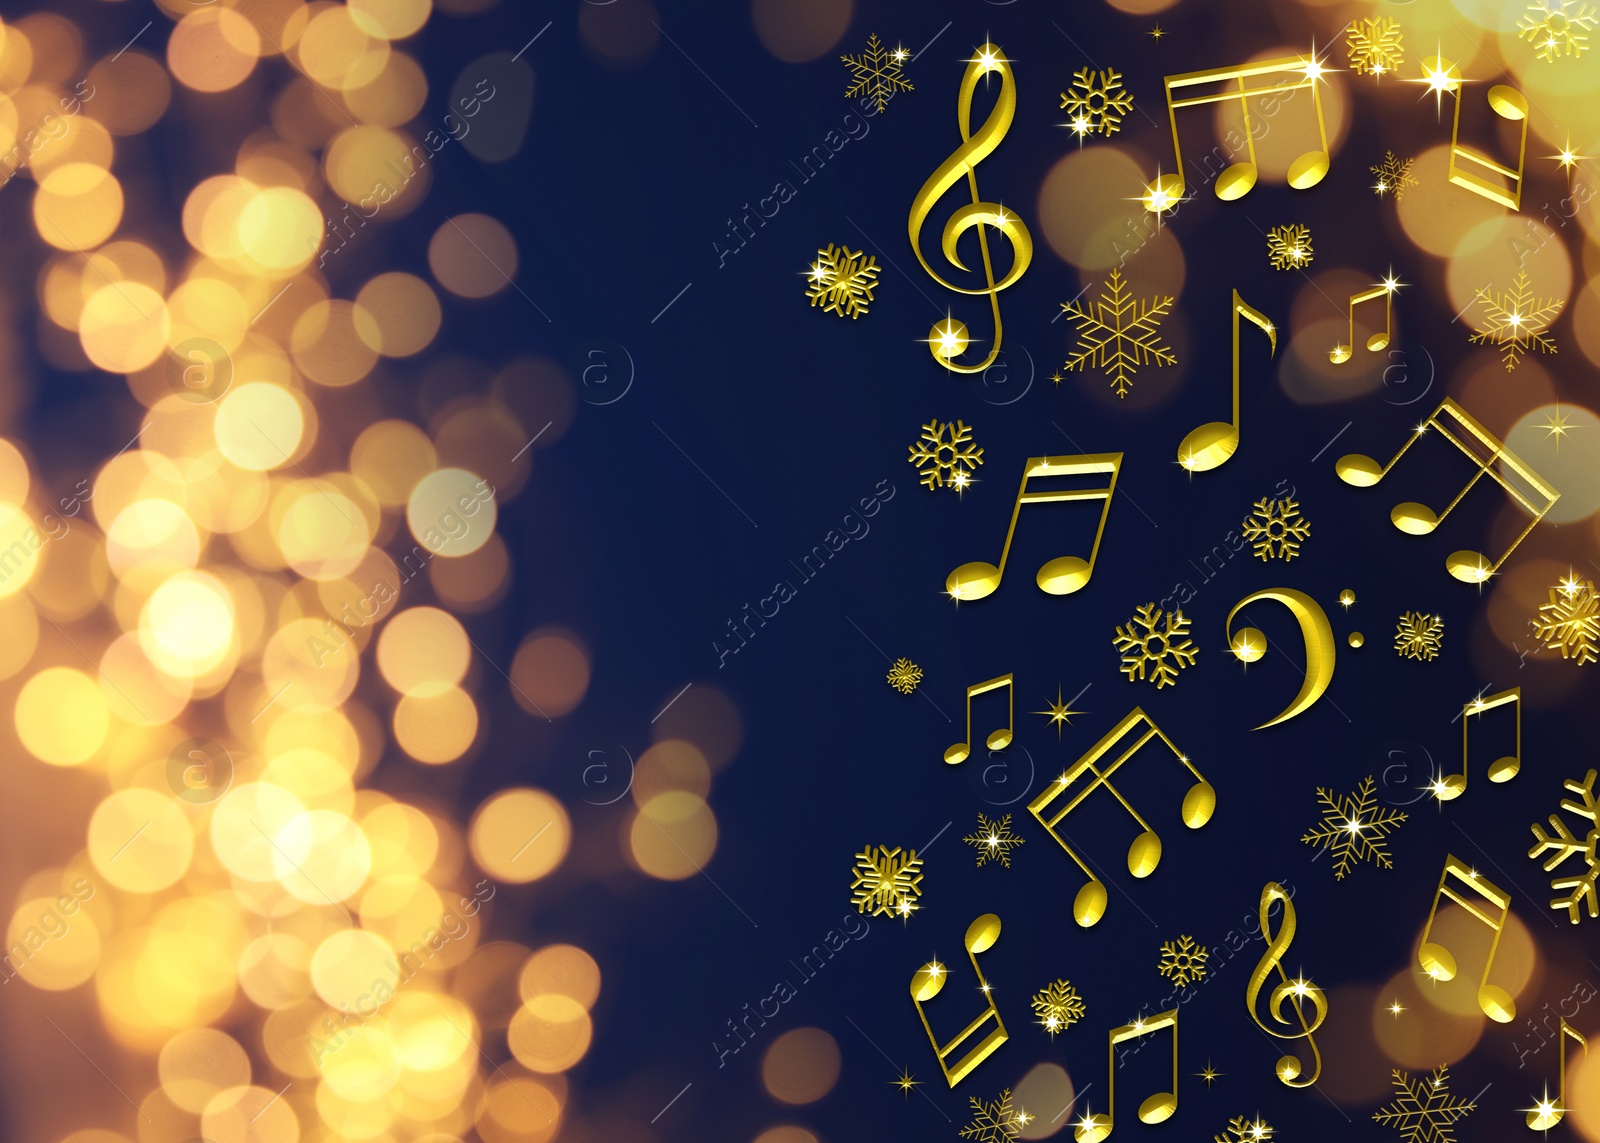 Image of Music notes and snowflakes on blue background, space for text. Bokeh effect